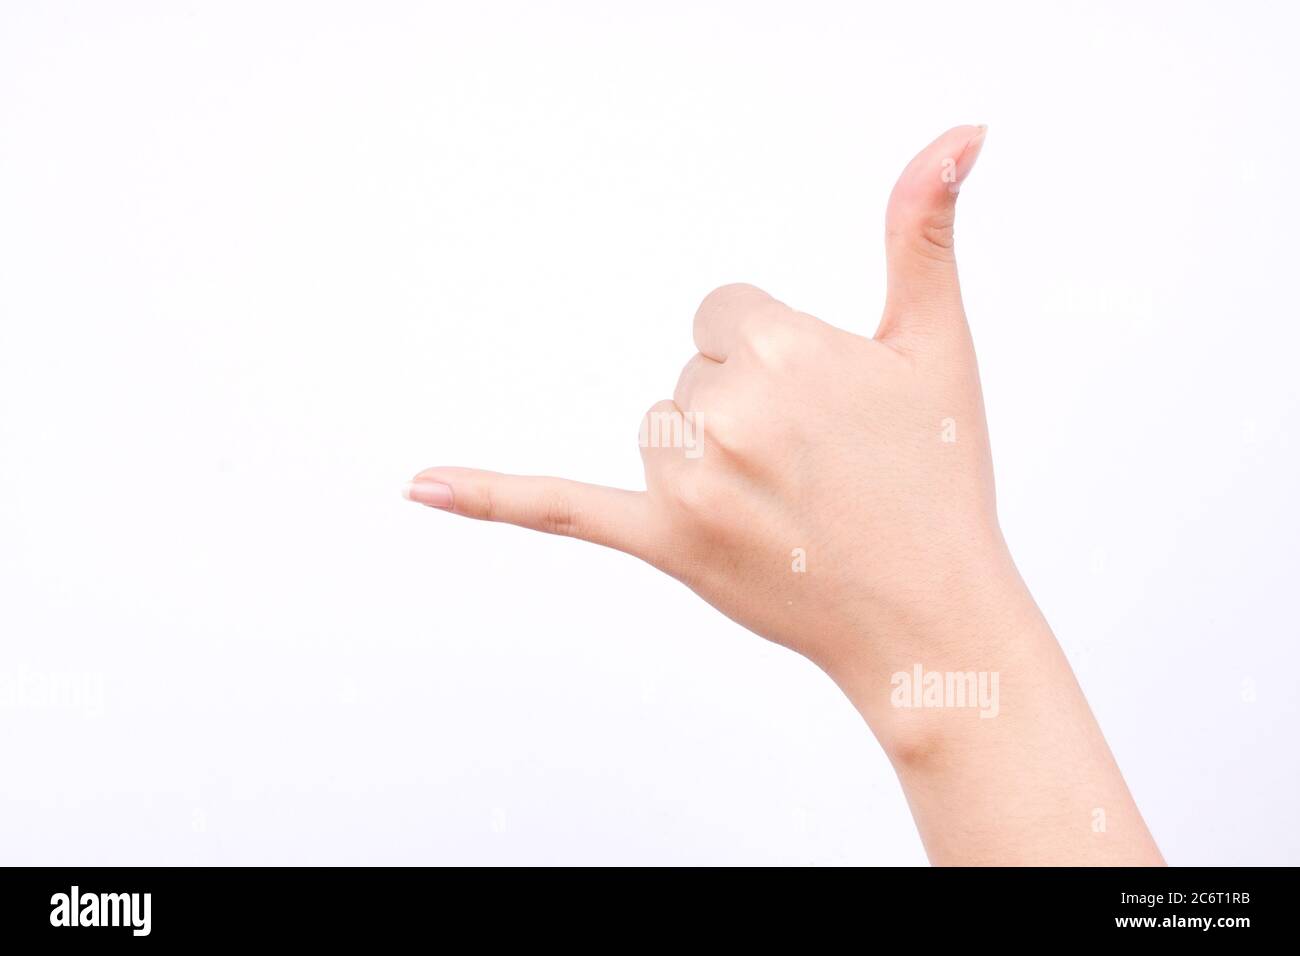 finger hand symbols isolated concept hand making a call phone me gesture sign on white background Stock Photo